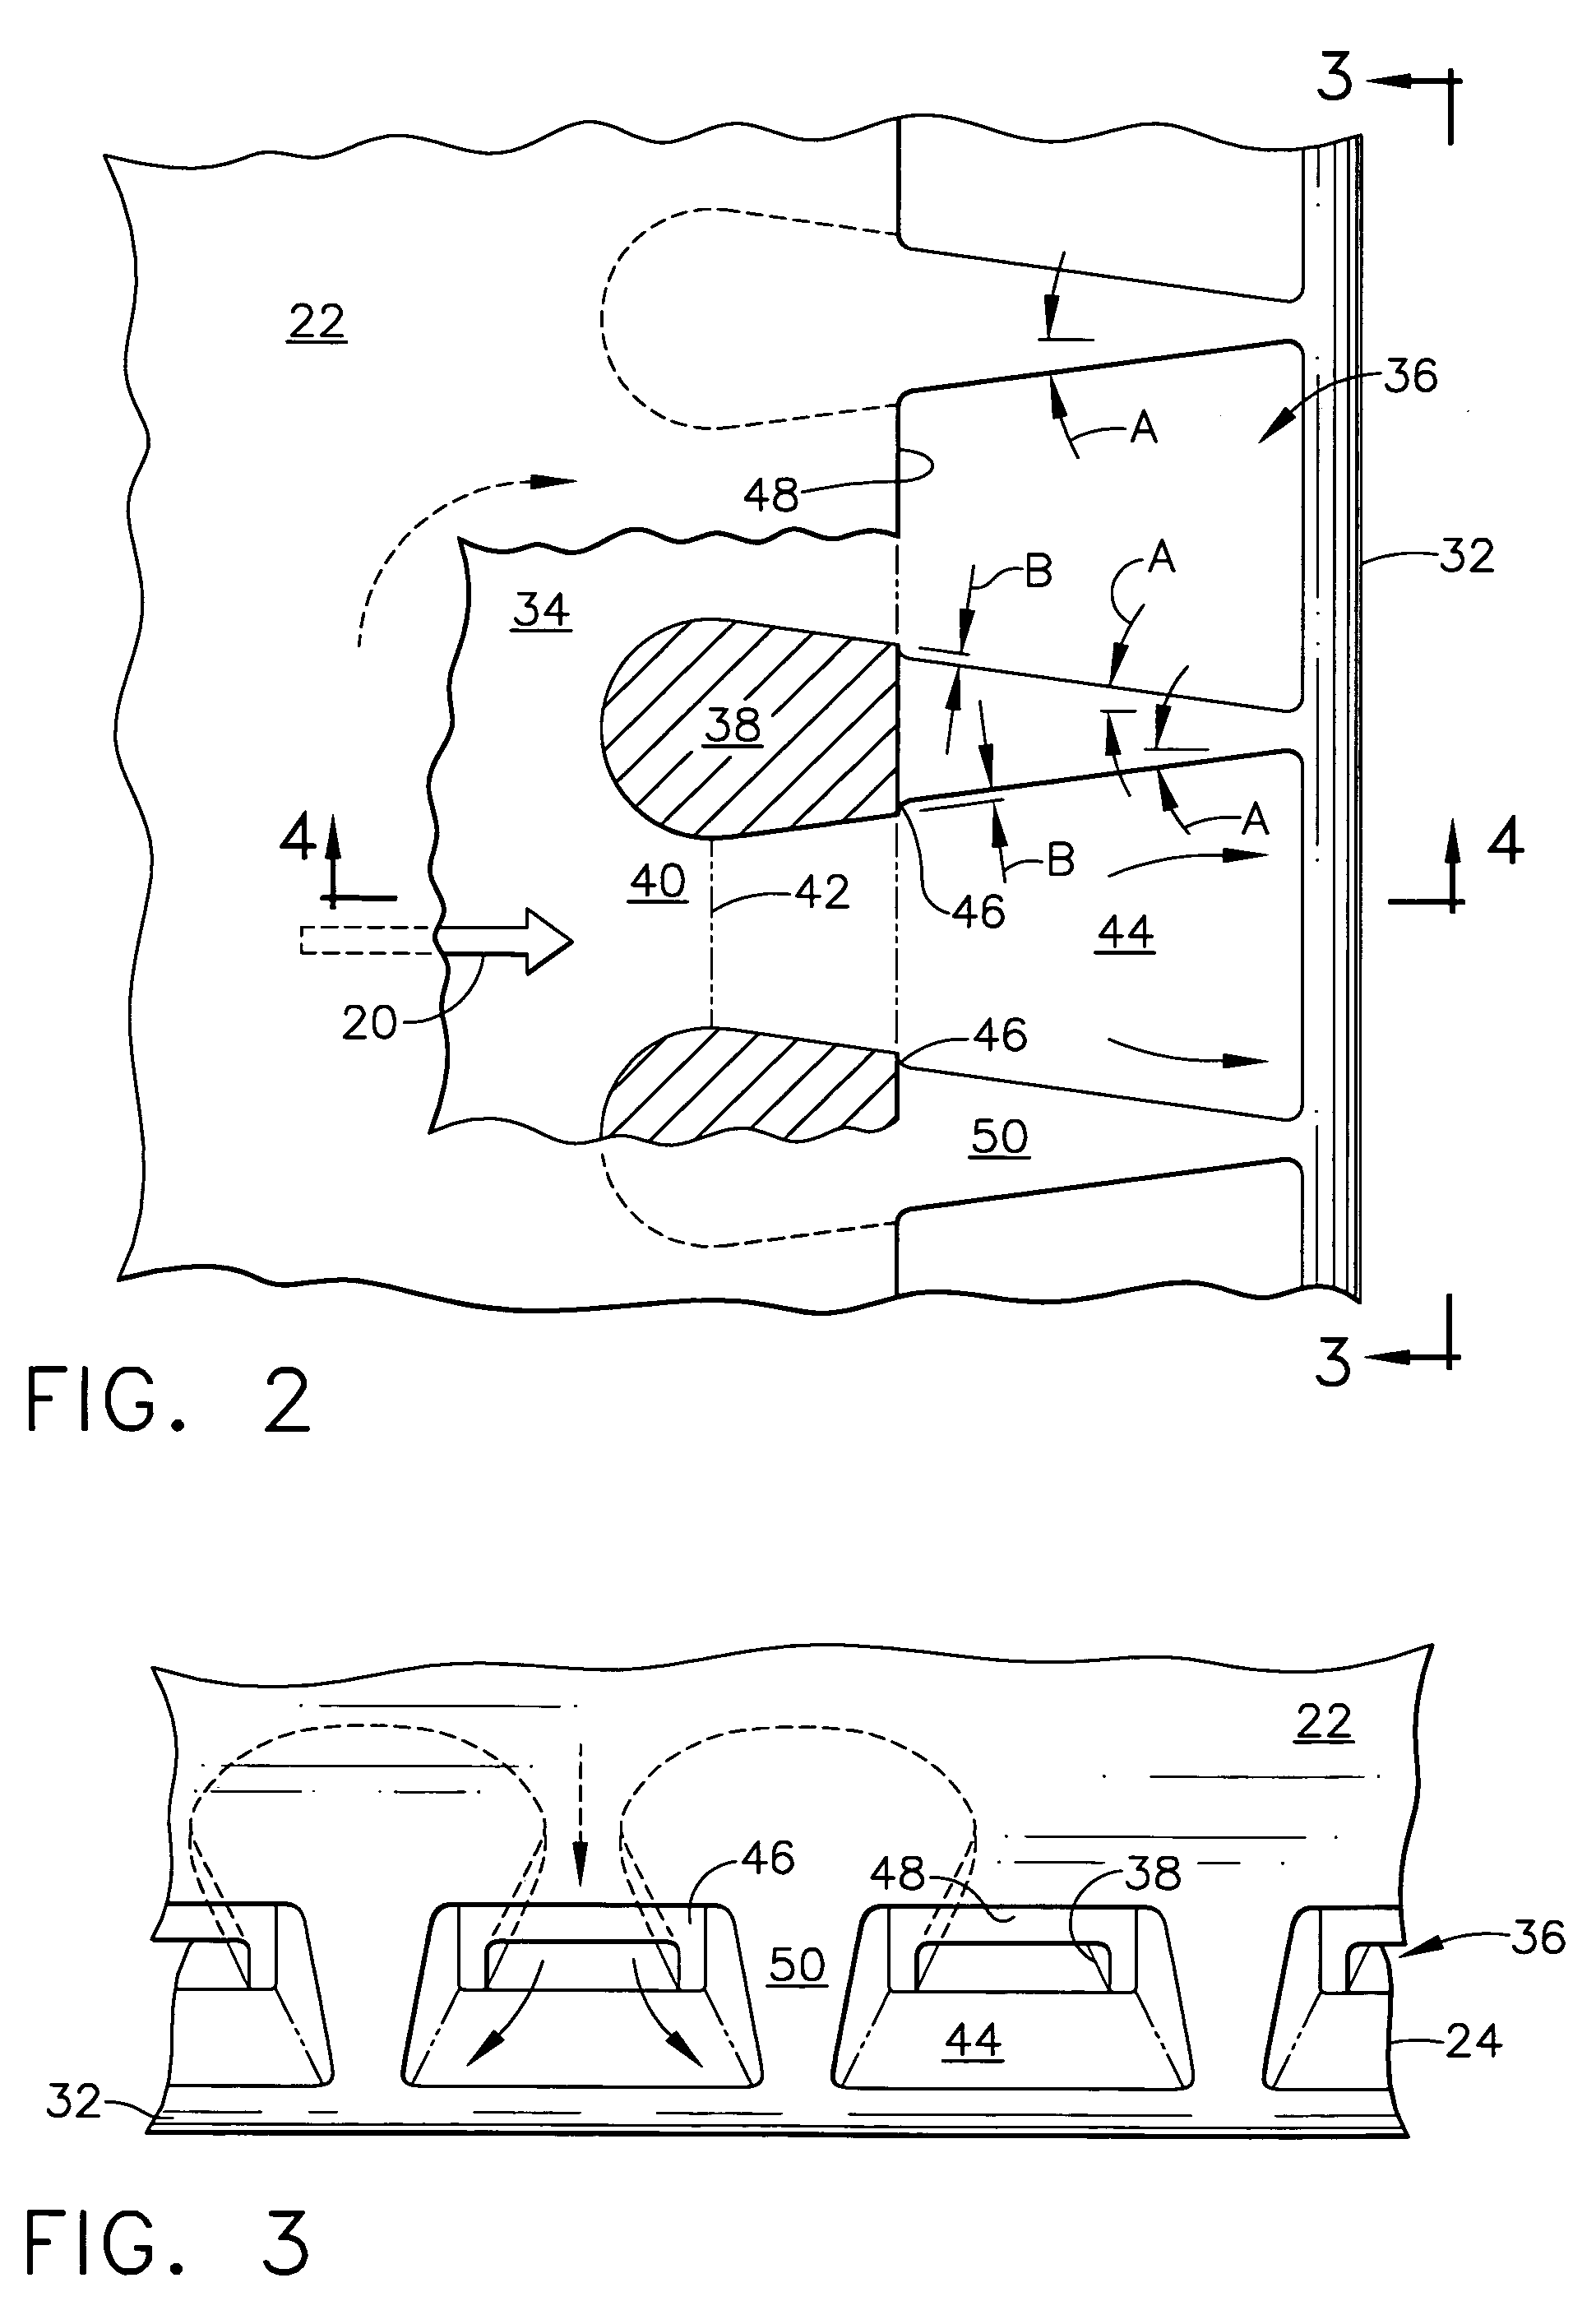 Stepped outlet turbine airfoil